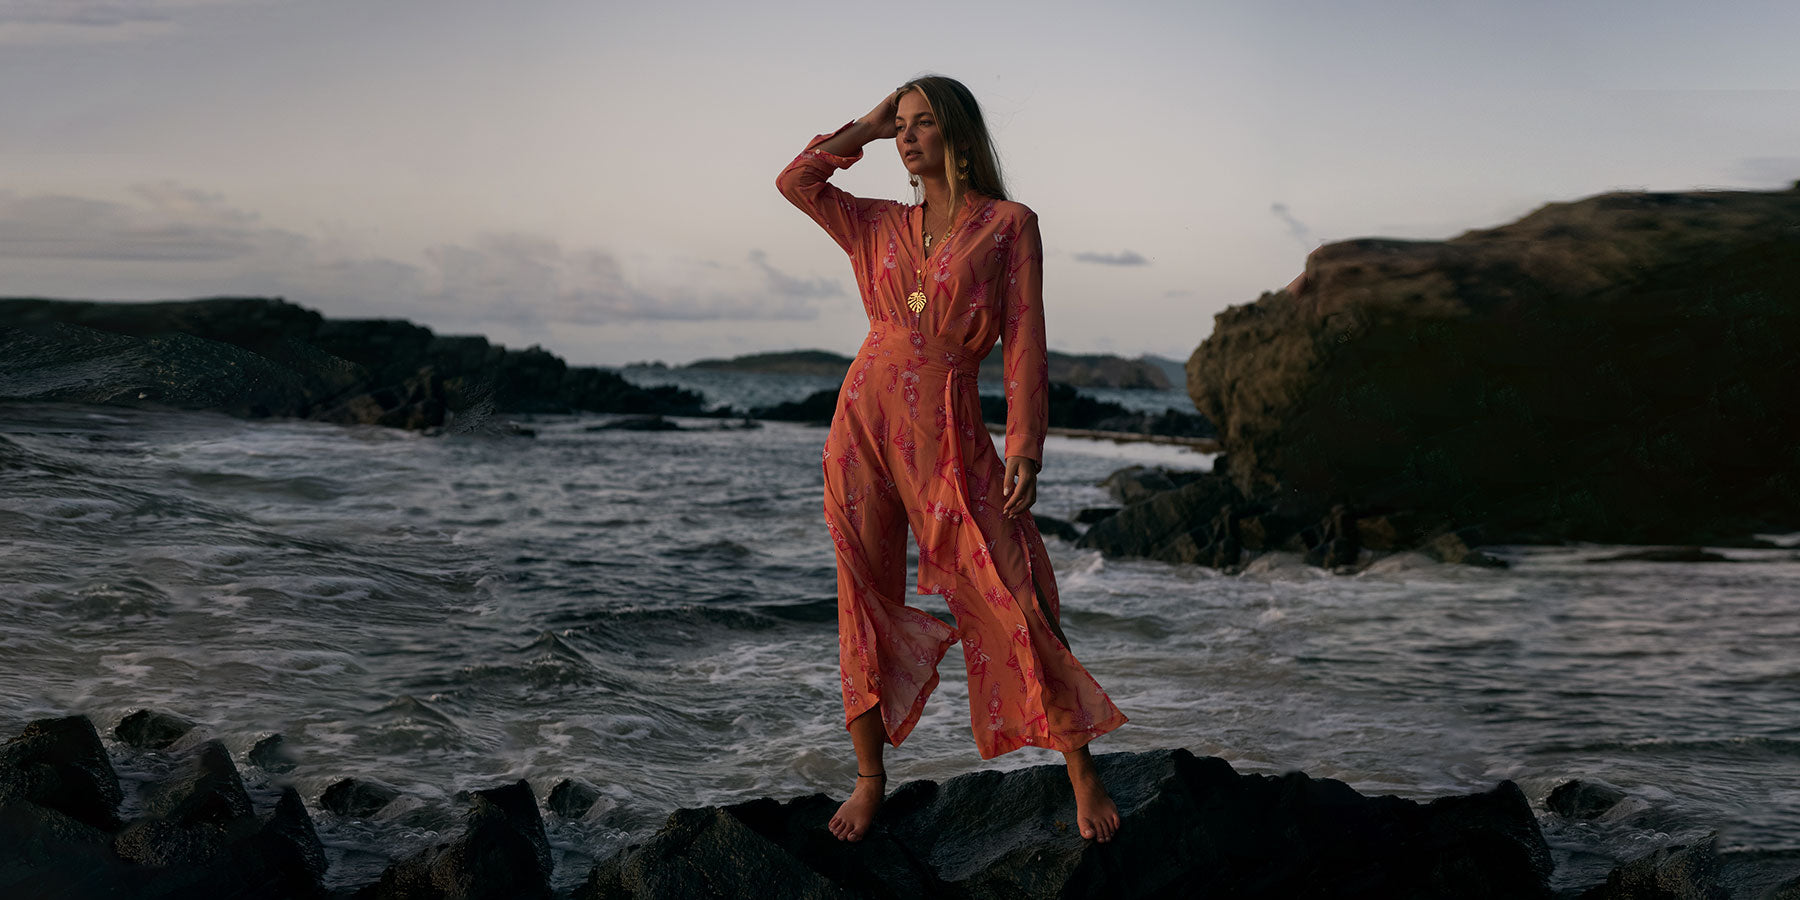 Silk wide leg pants & jumpsuits for super elegant holiday style. Look & feel a million dollars as you stroll down the beach or shimmer at the bar. Luxury Resort Wear designed by Lotty B on Mustique